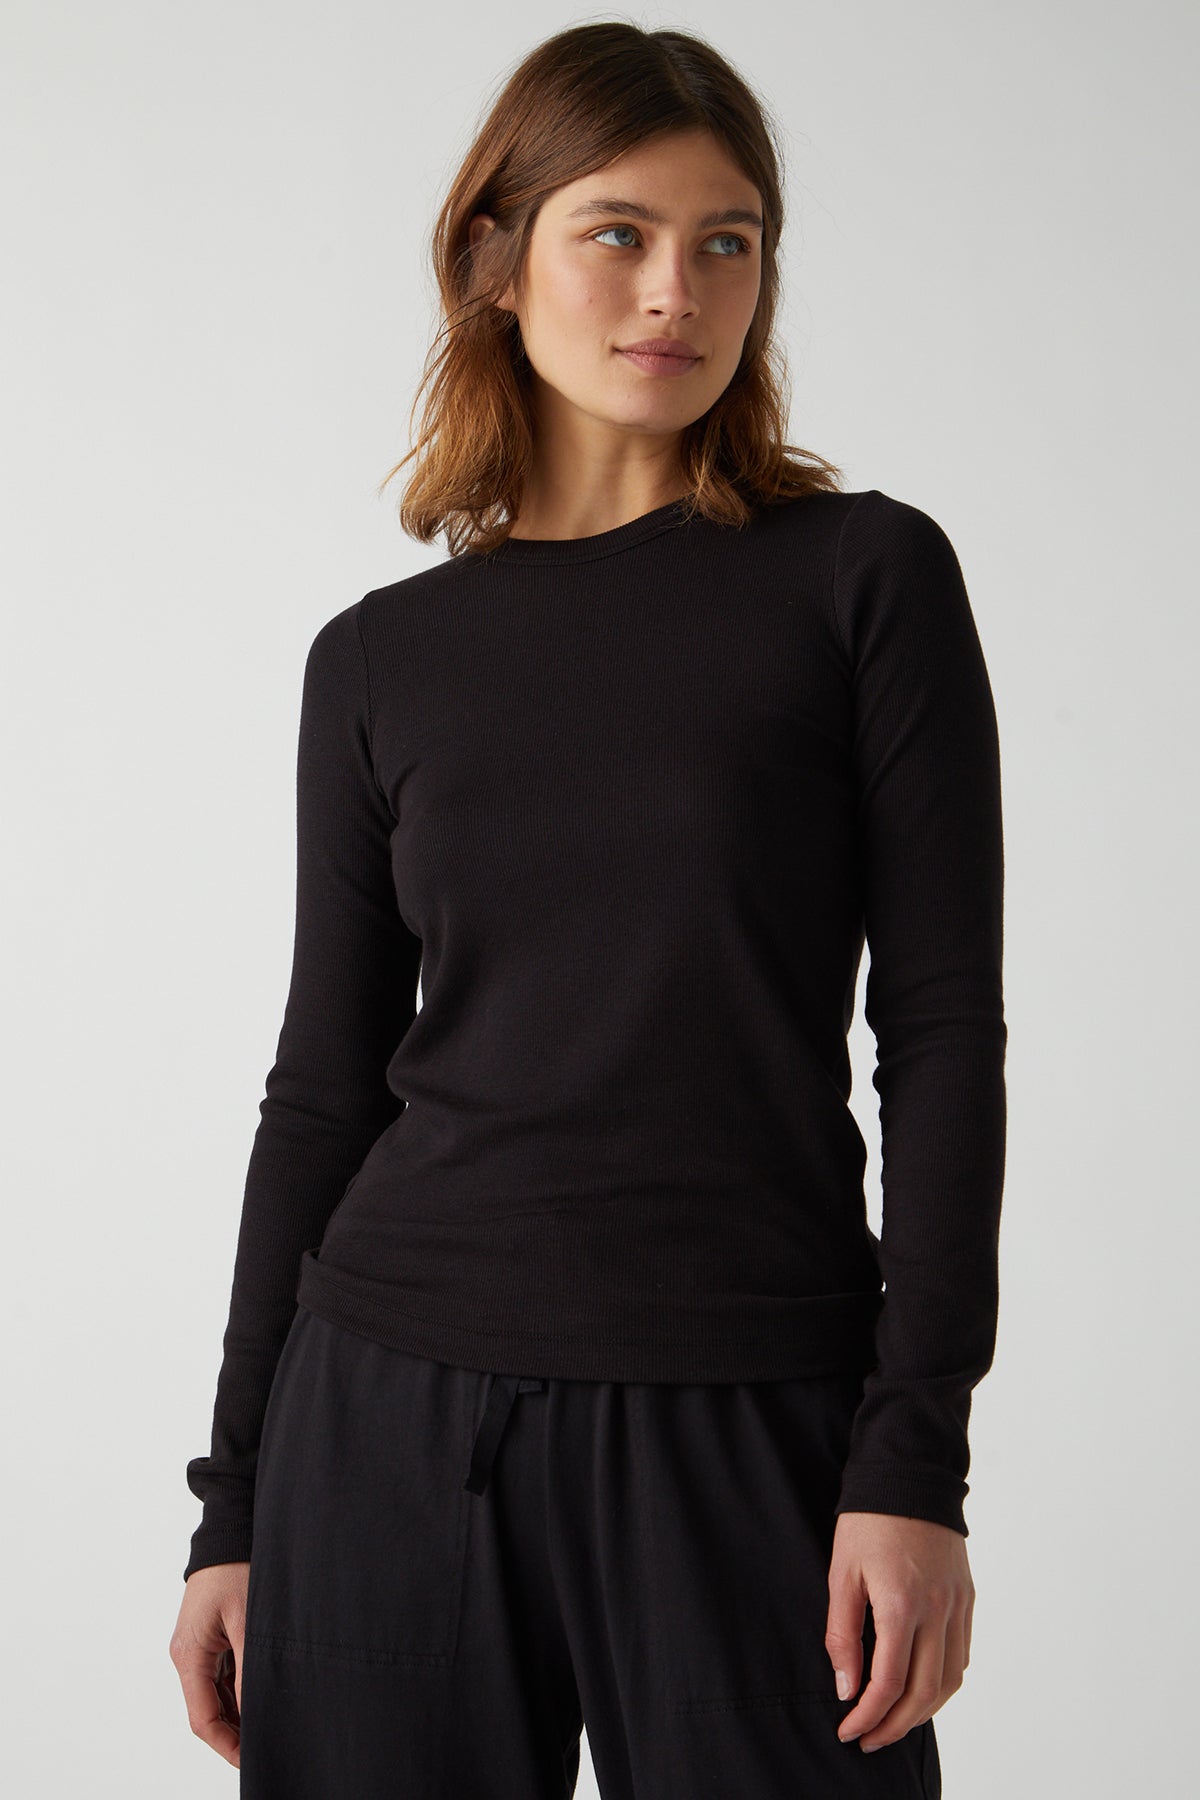   Long Sleeve Camino Tee in black front 